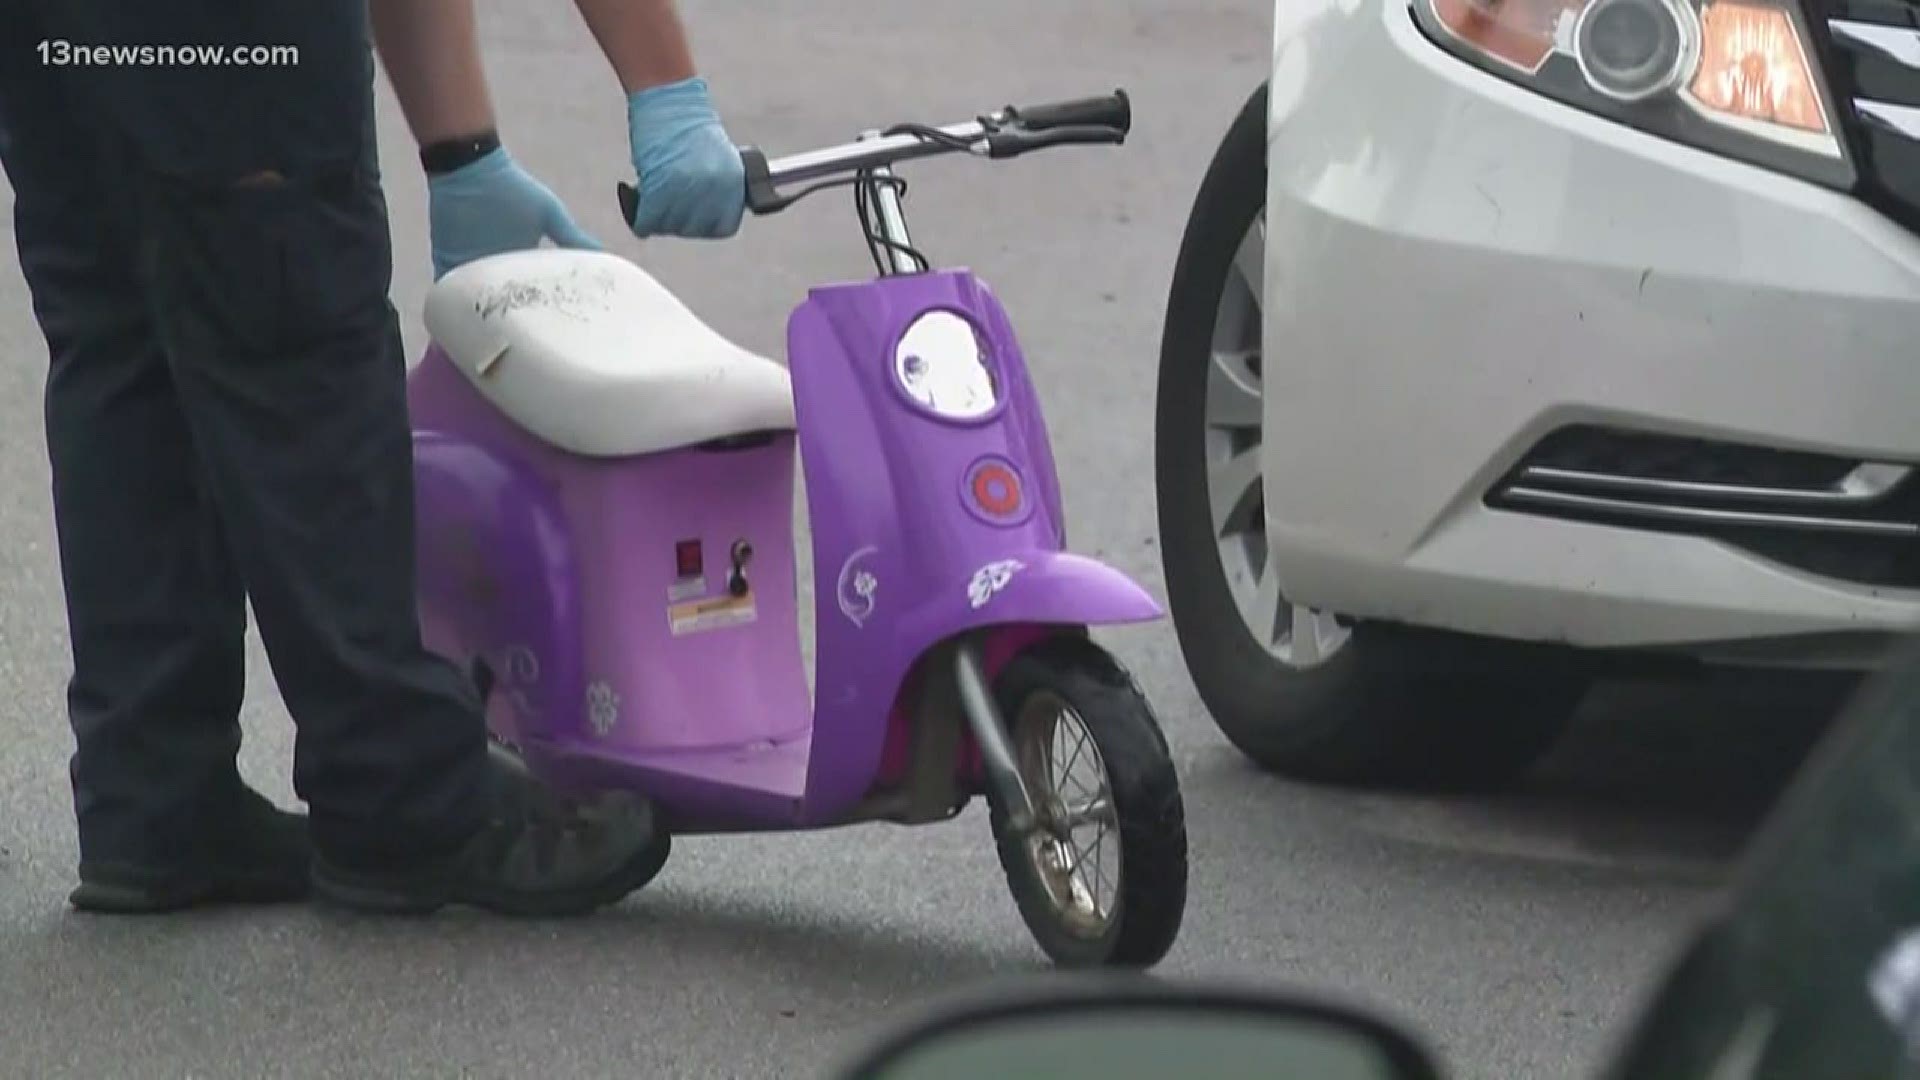 The 7-year-old was playing on a scooter when she was hit by a car and had to be airlifted to a hospital. Her aunt said the girl's father was outside when she was hit